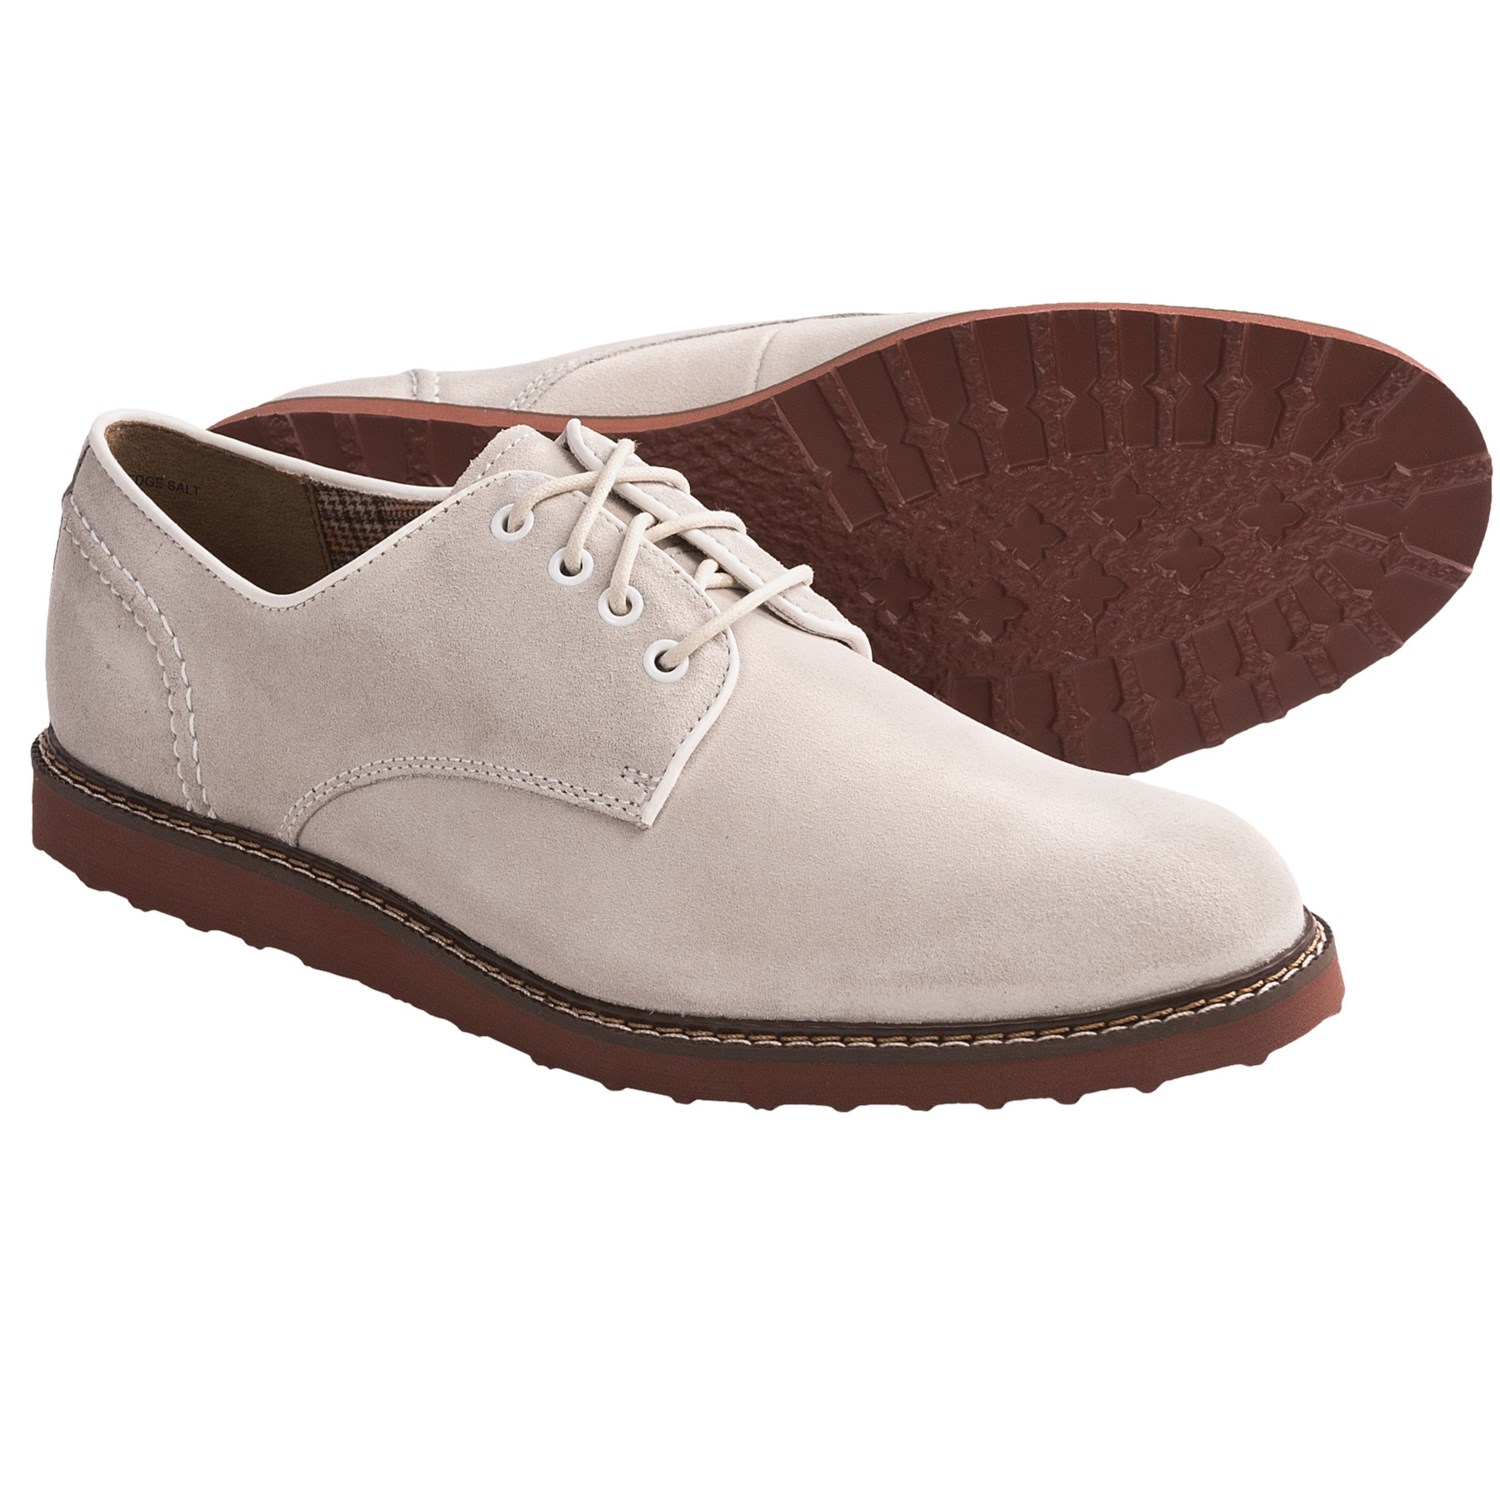 Water  for   Hush Puppies Men) hush (For Resistant Shoes Wedge puppies slippers Derby Suede in  men